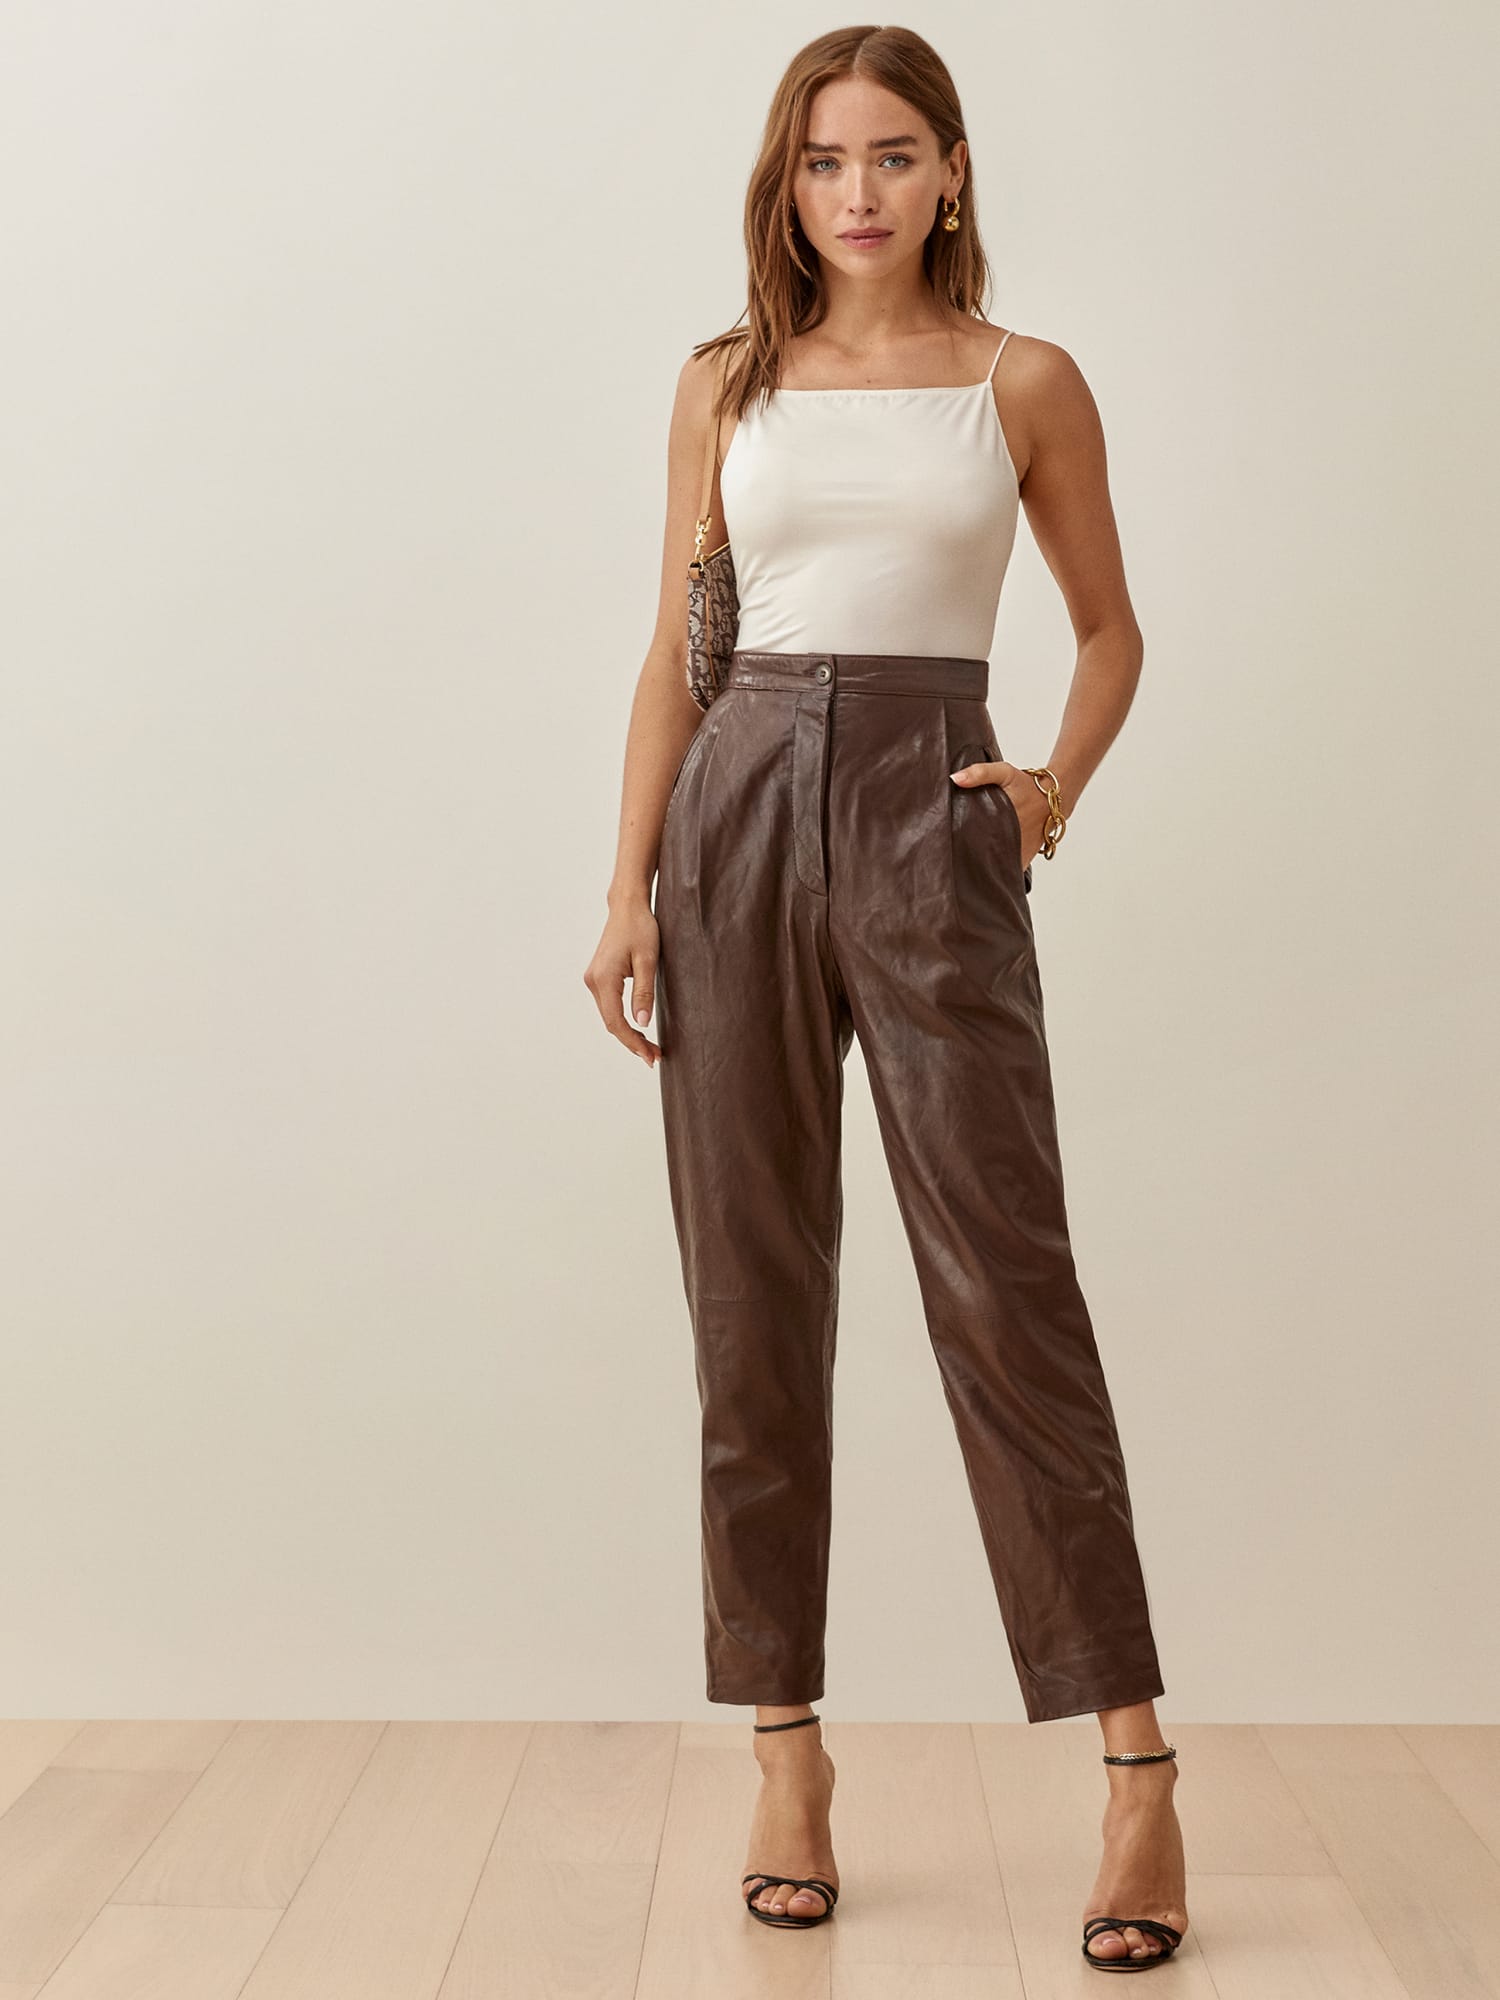 Reformation Stevie Pants in Natural